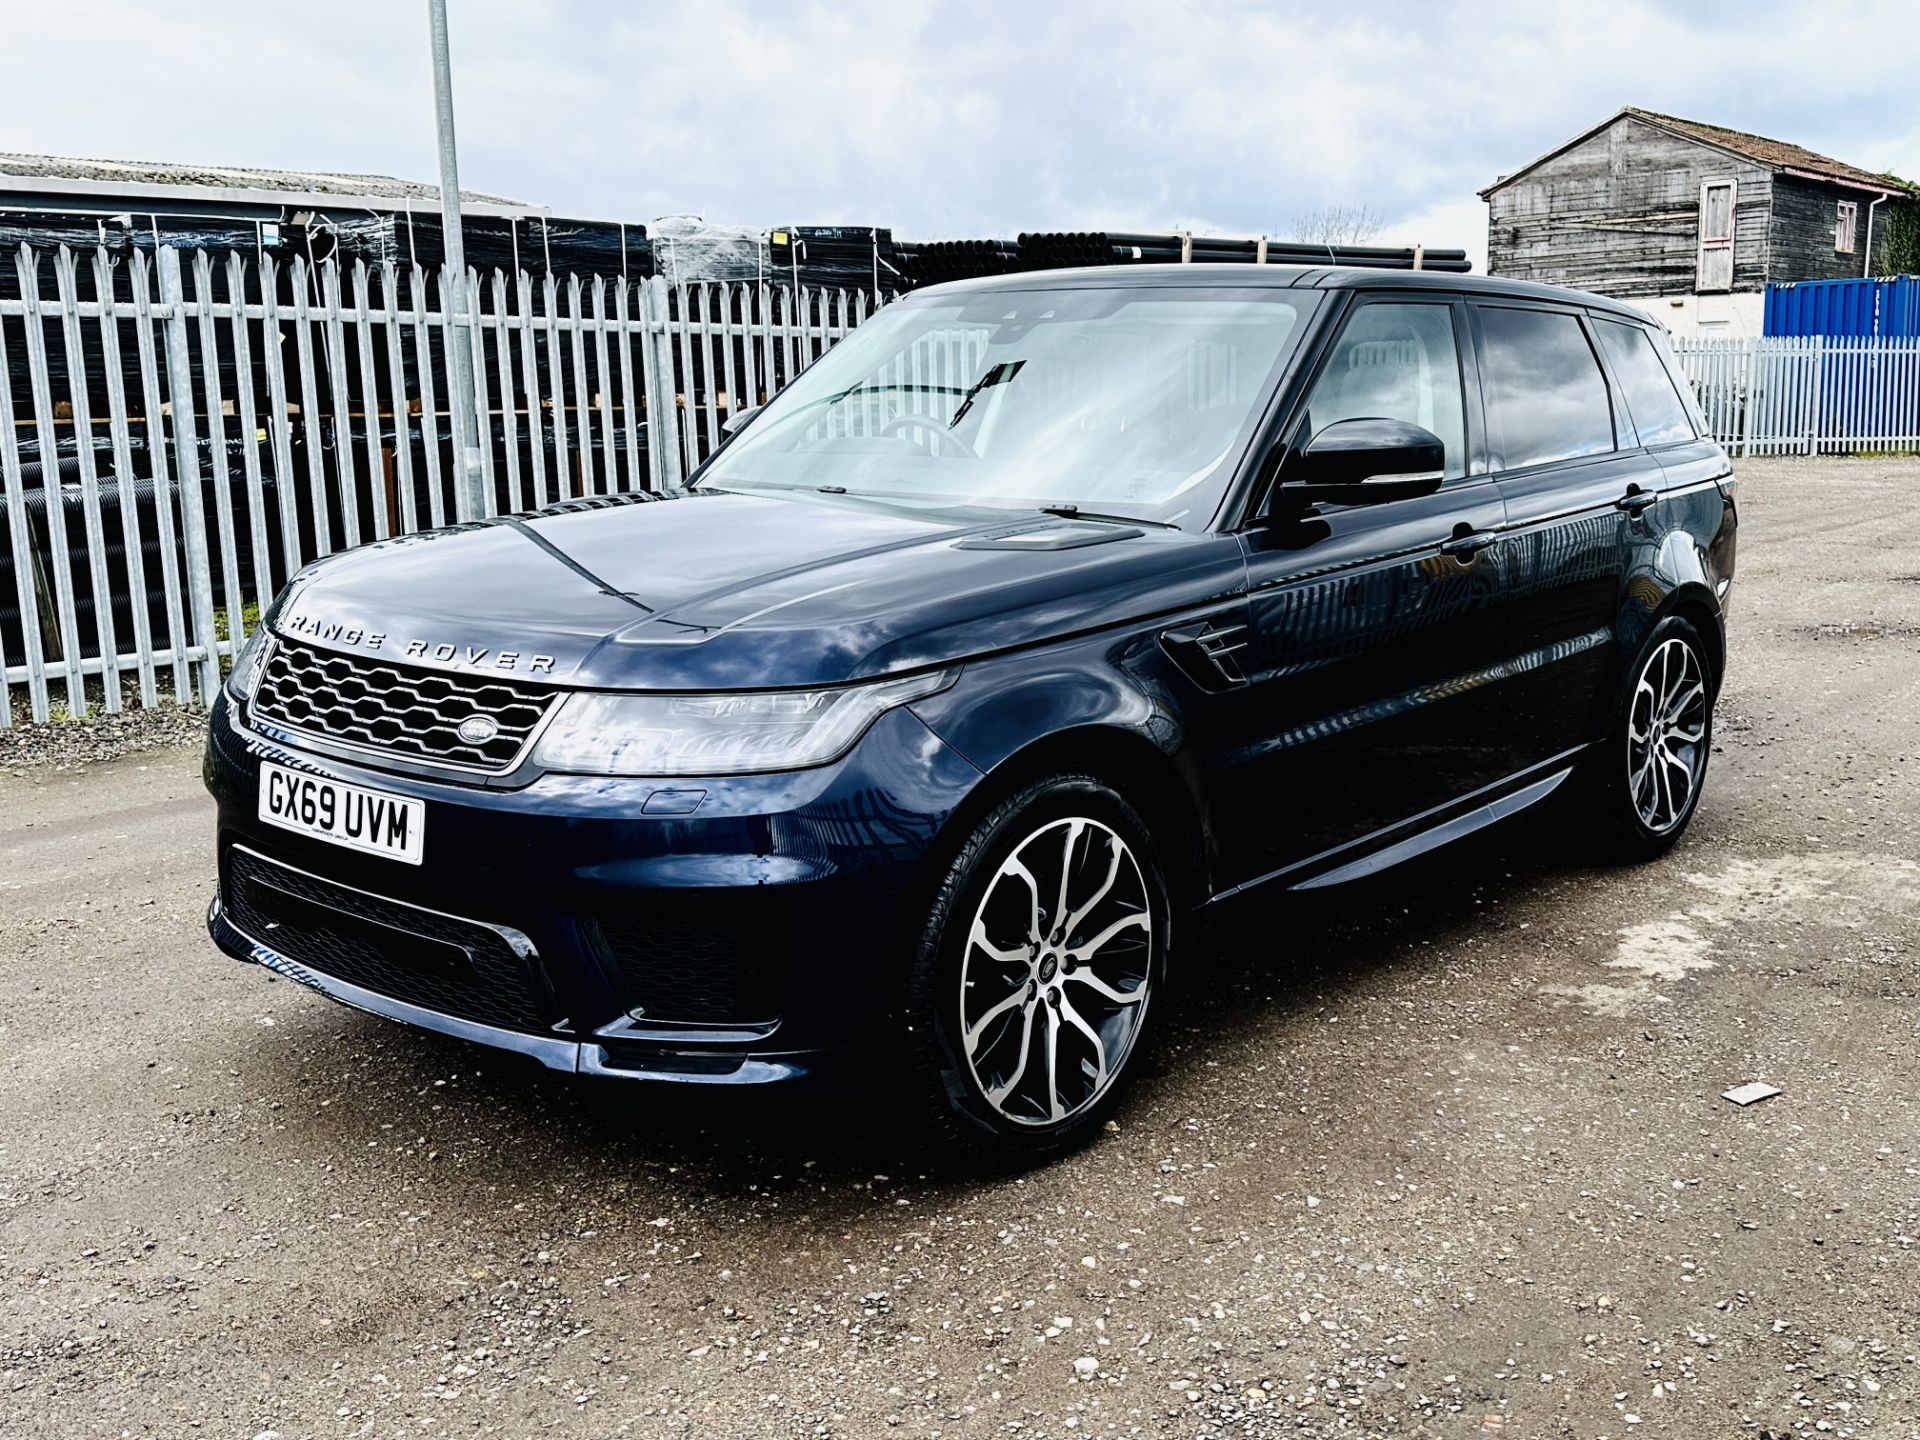 **ON SALE** Land Rover Range Rover Sport 3.0 SDV6 HSE DYNAMIC 2020 '69 Reg'- Only 47544 Miles - Image 6 of 30